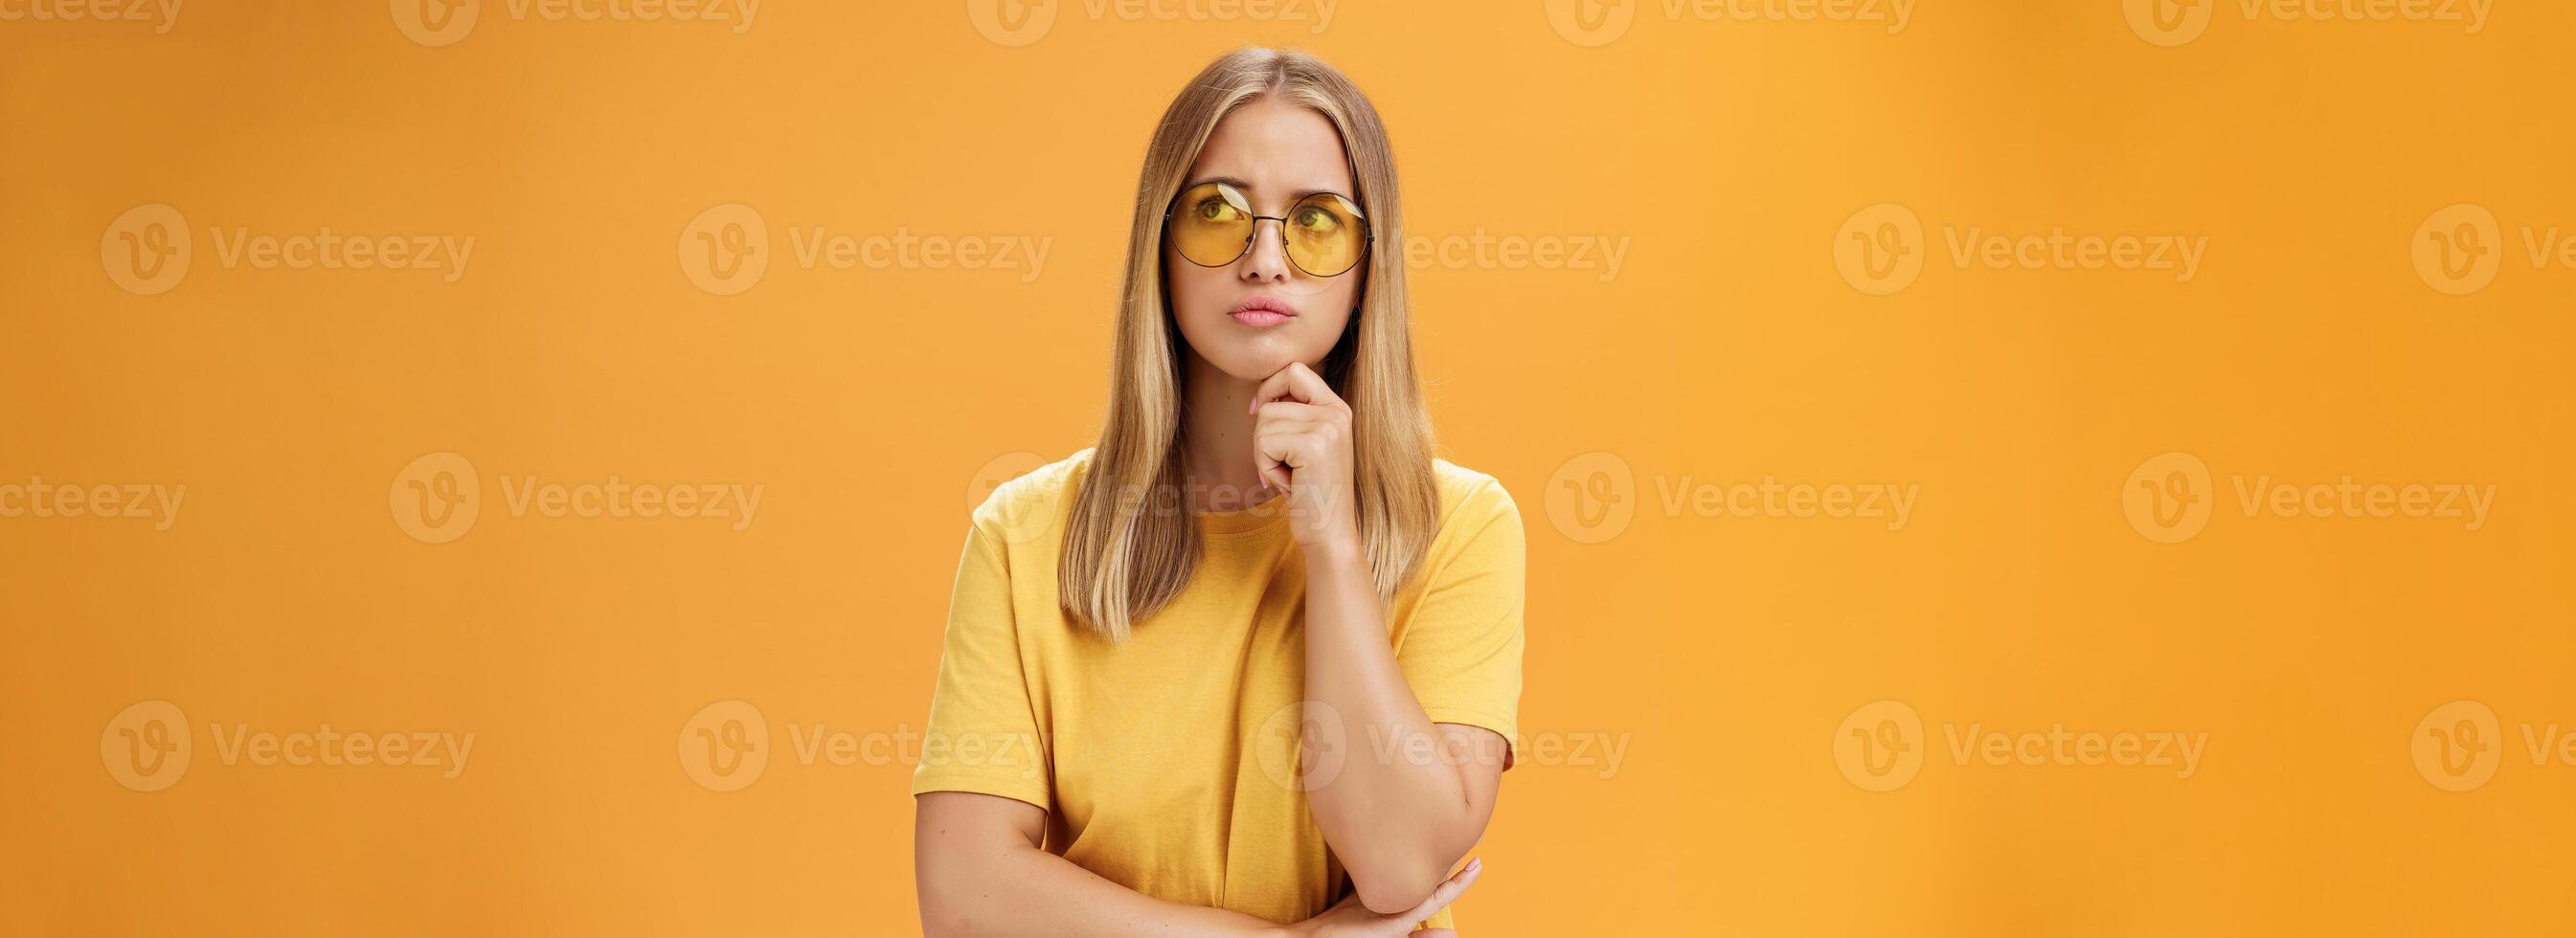 Troubled and concerned young stylish woman facing troublesome problem thinking holding hand on chin pursing lips looking at upper right corner thoughtfully standing against orange background photo